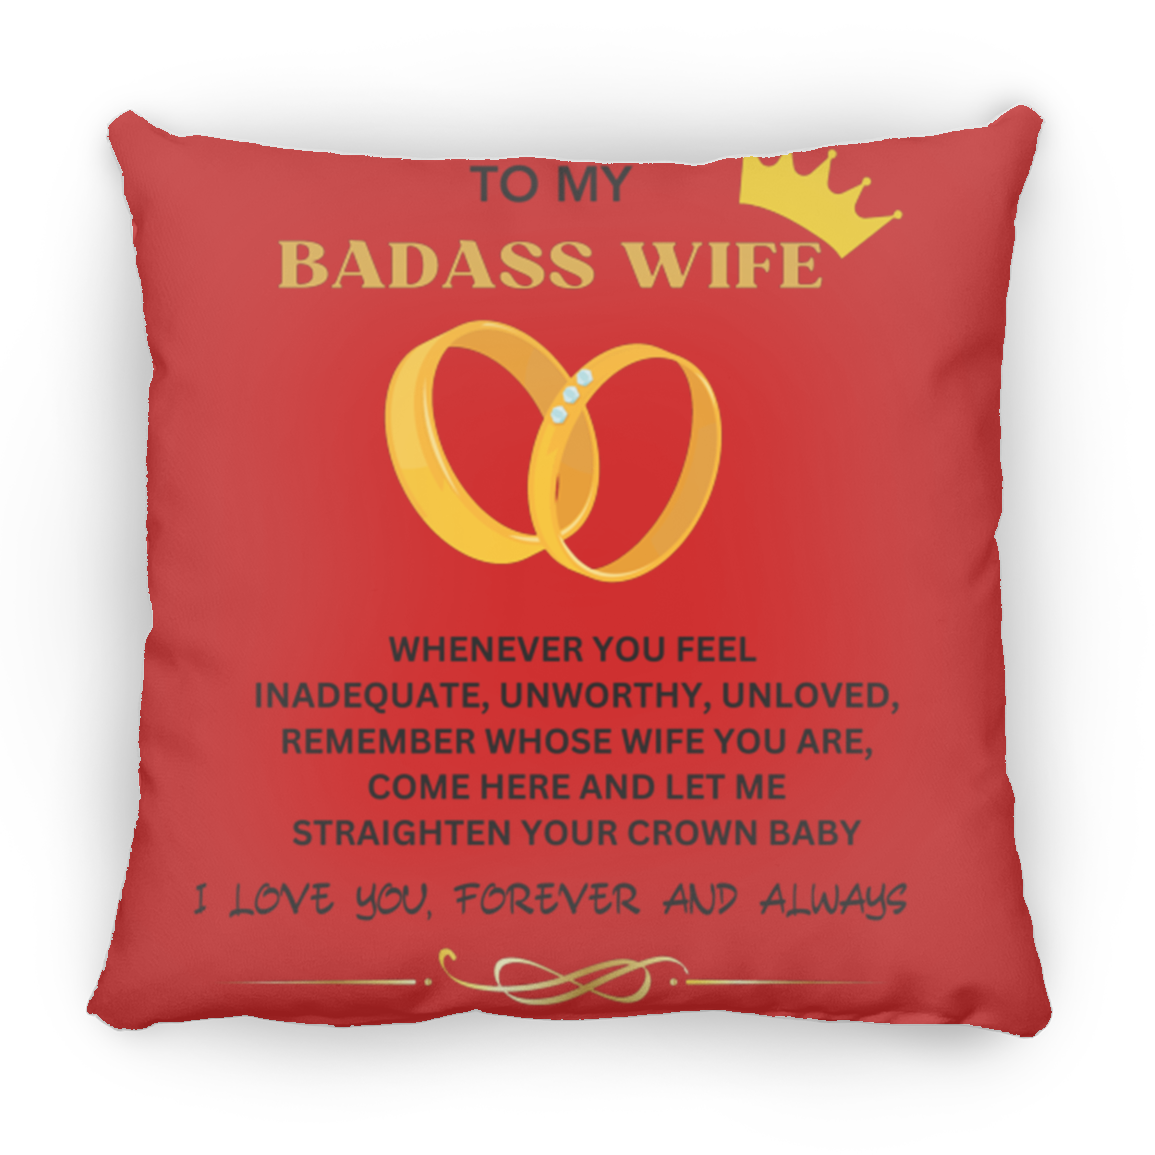 TO MY BADASS WIFE Square Pillow